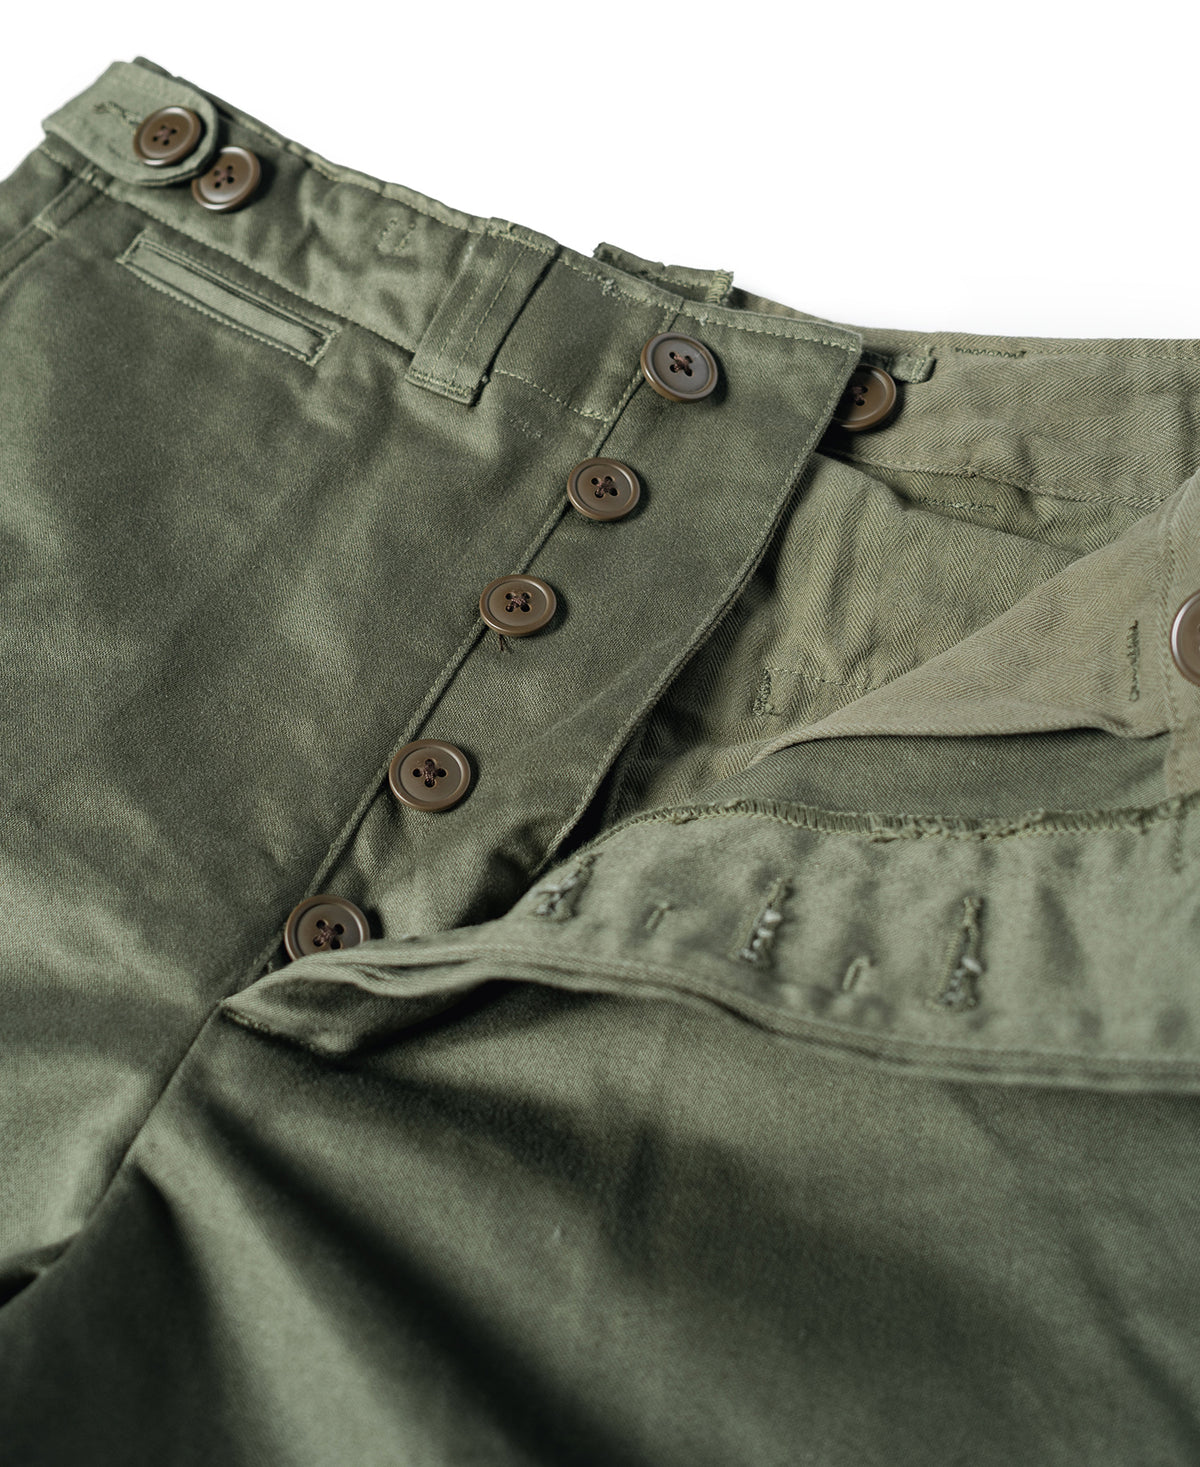 US Army M-43 Field Trousers